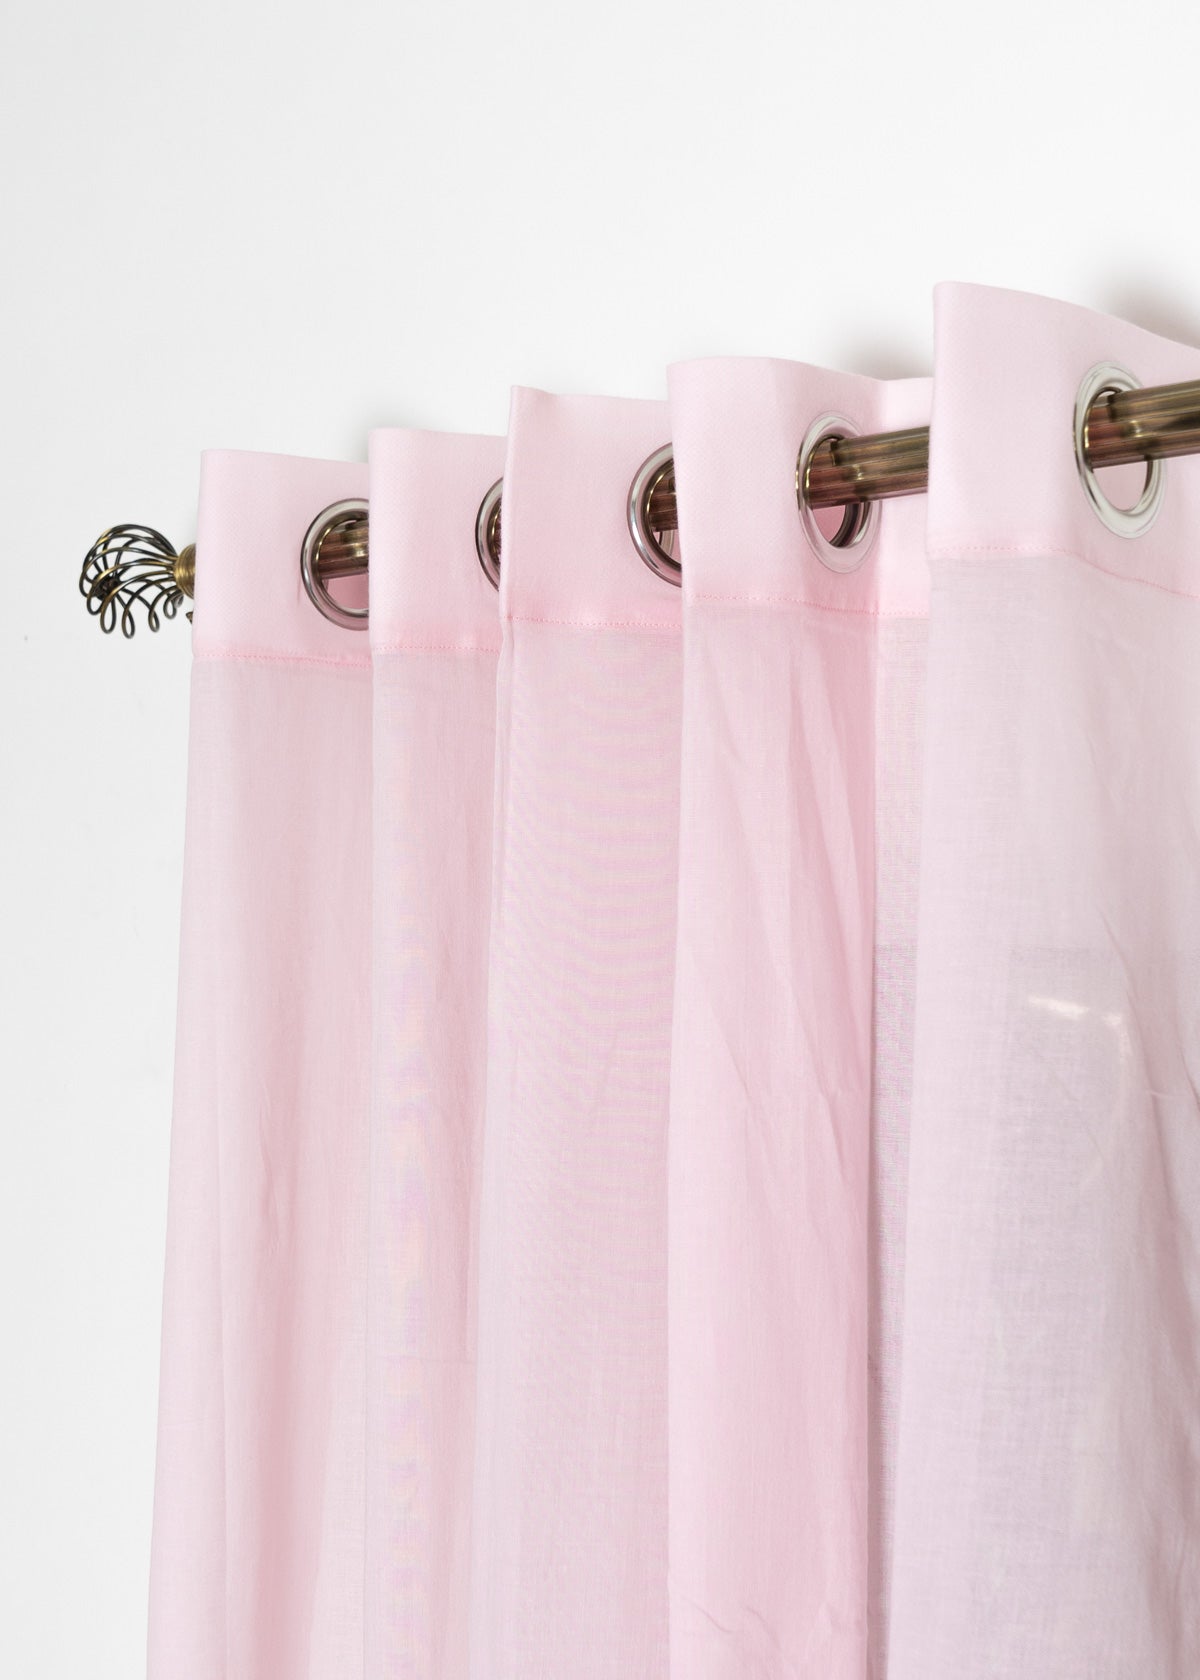 Solid Powder pink 100% cotton plain curtain for Living room & bedroom - Light filtering - Pack of 1